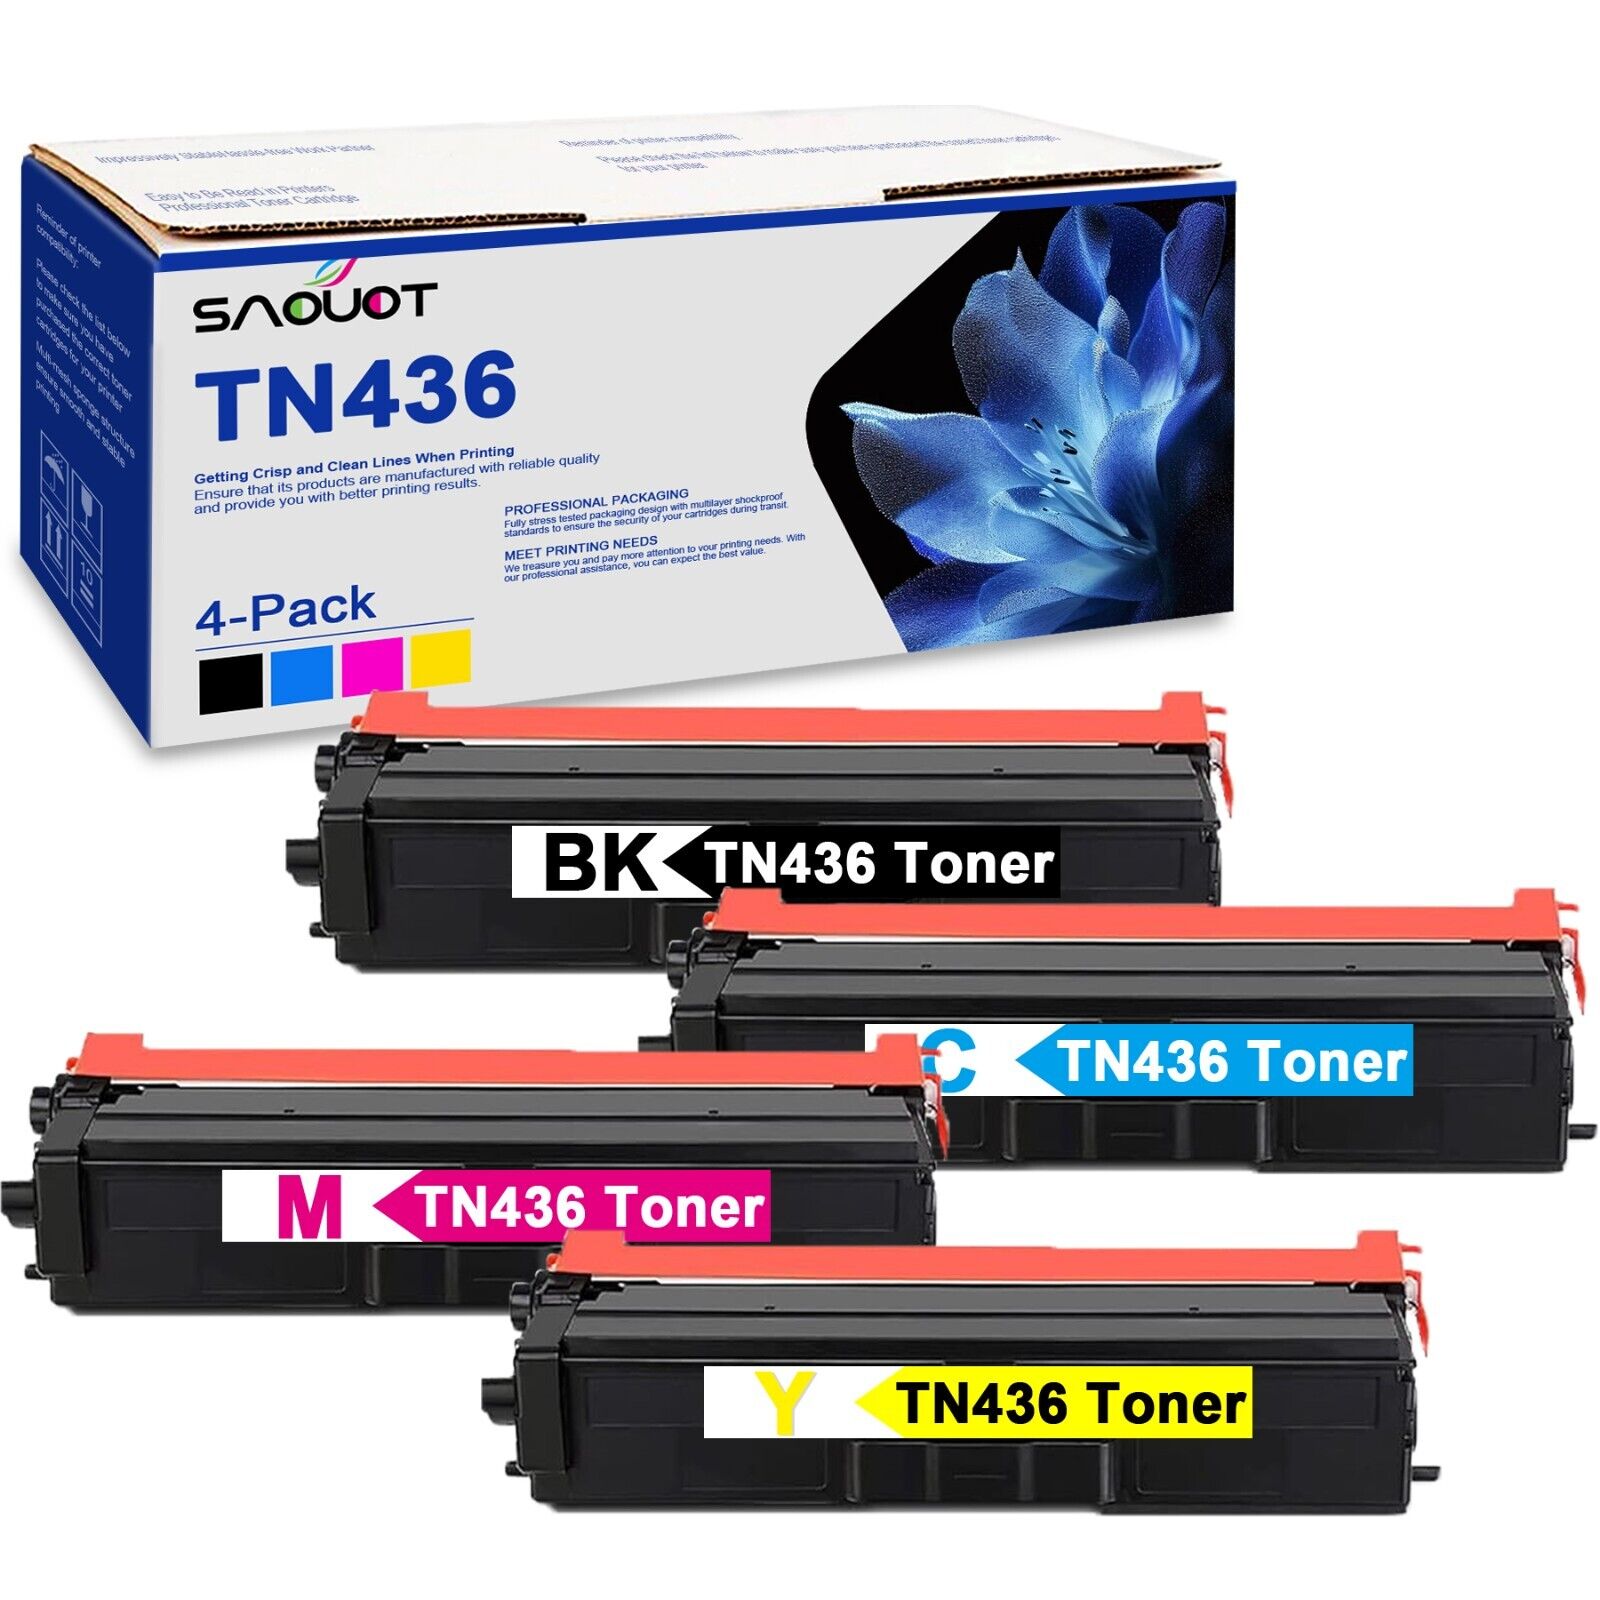 TN436 Toner Cartridge Replacement for Brother HL-L8360CDW 8360CDWT MFC-L8895CDW